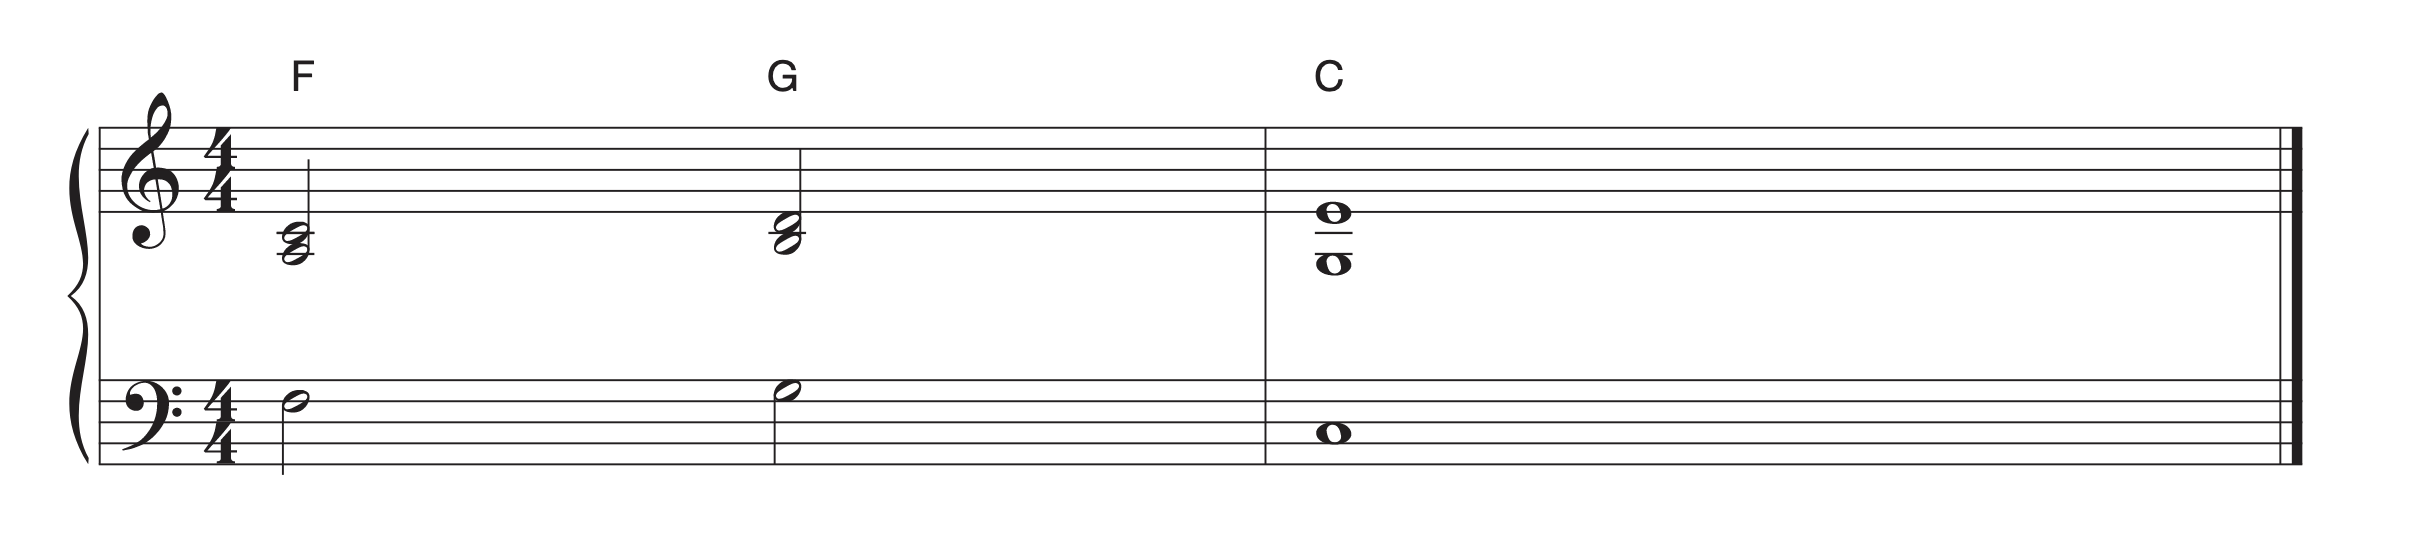 This is a music notation example of triads, where you can see the guide tones for voice leading.